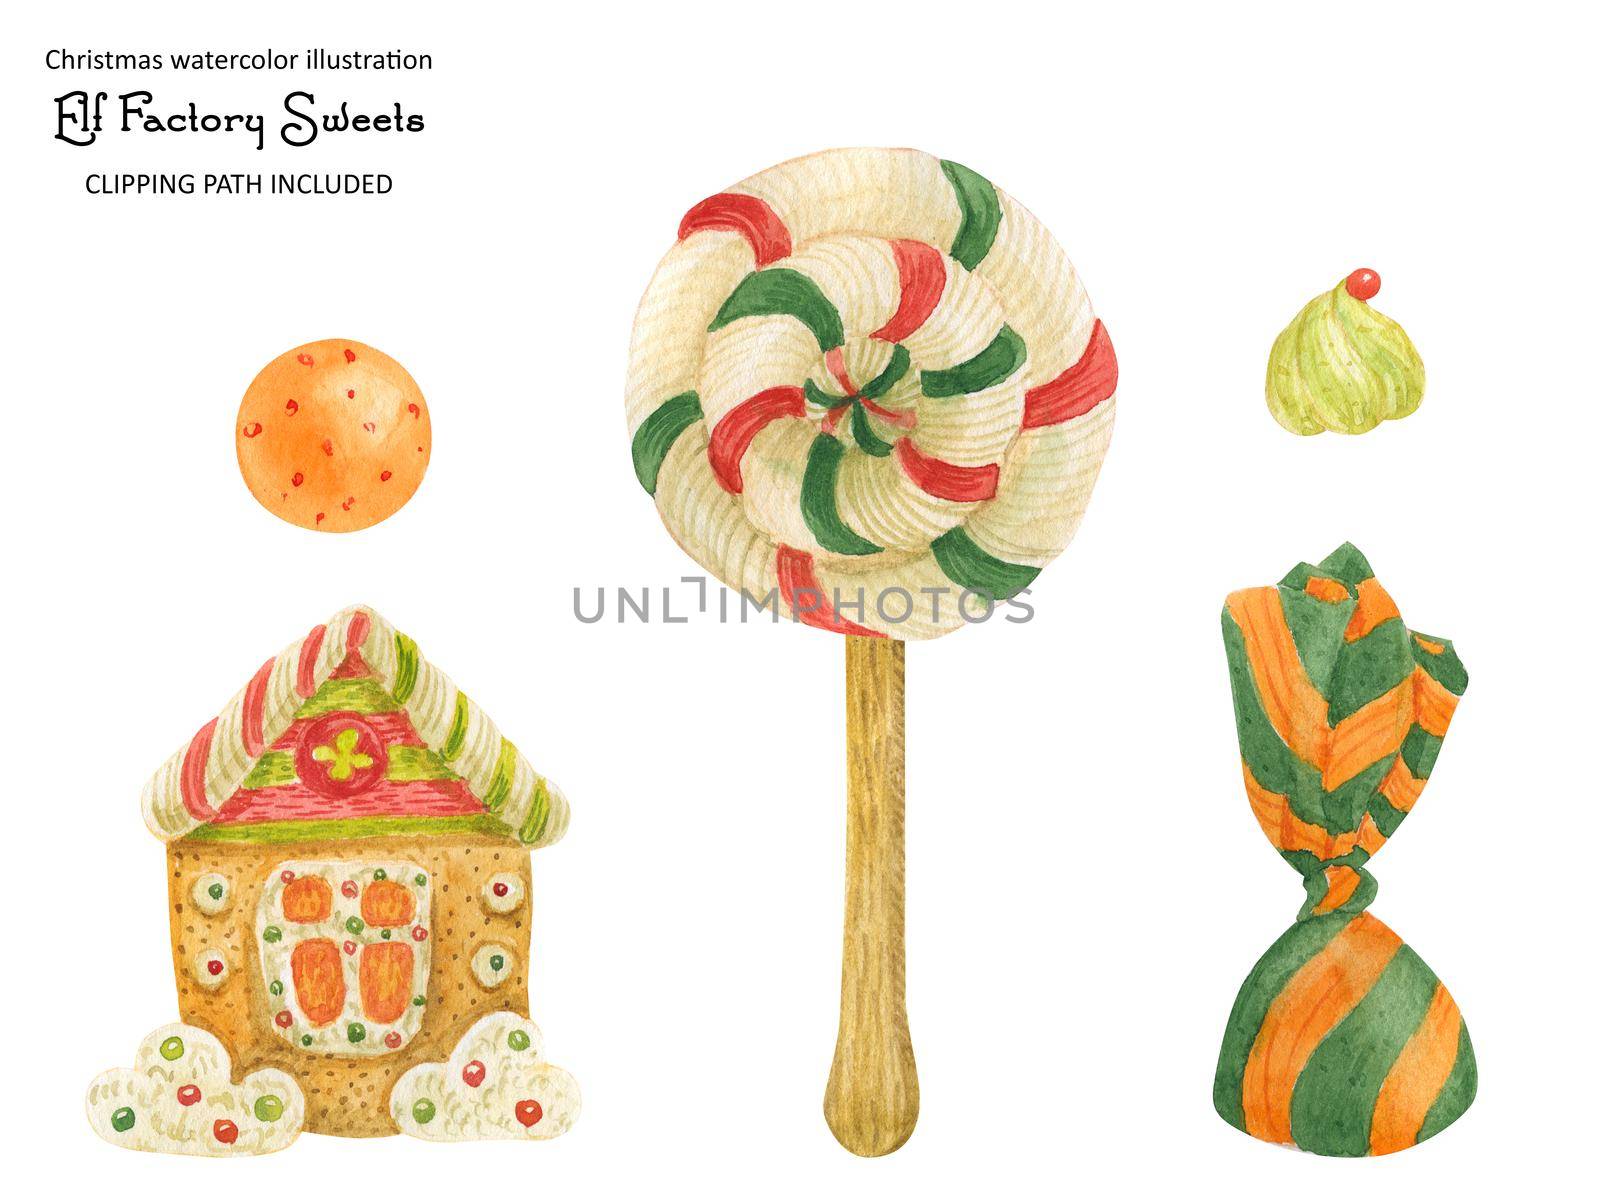 Christmas candy sweets and gingerbread house, watercolor isolated illustration with clipping path